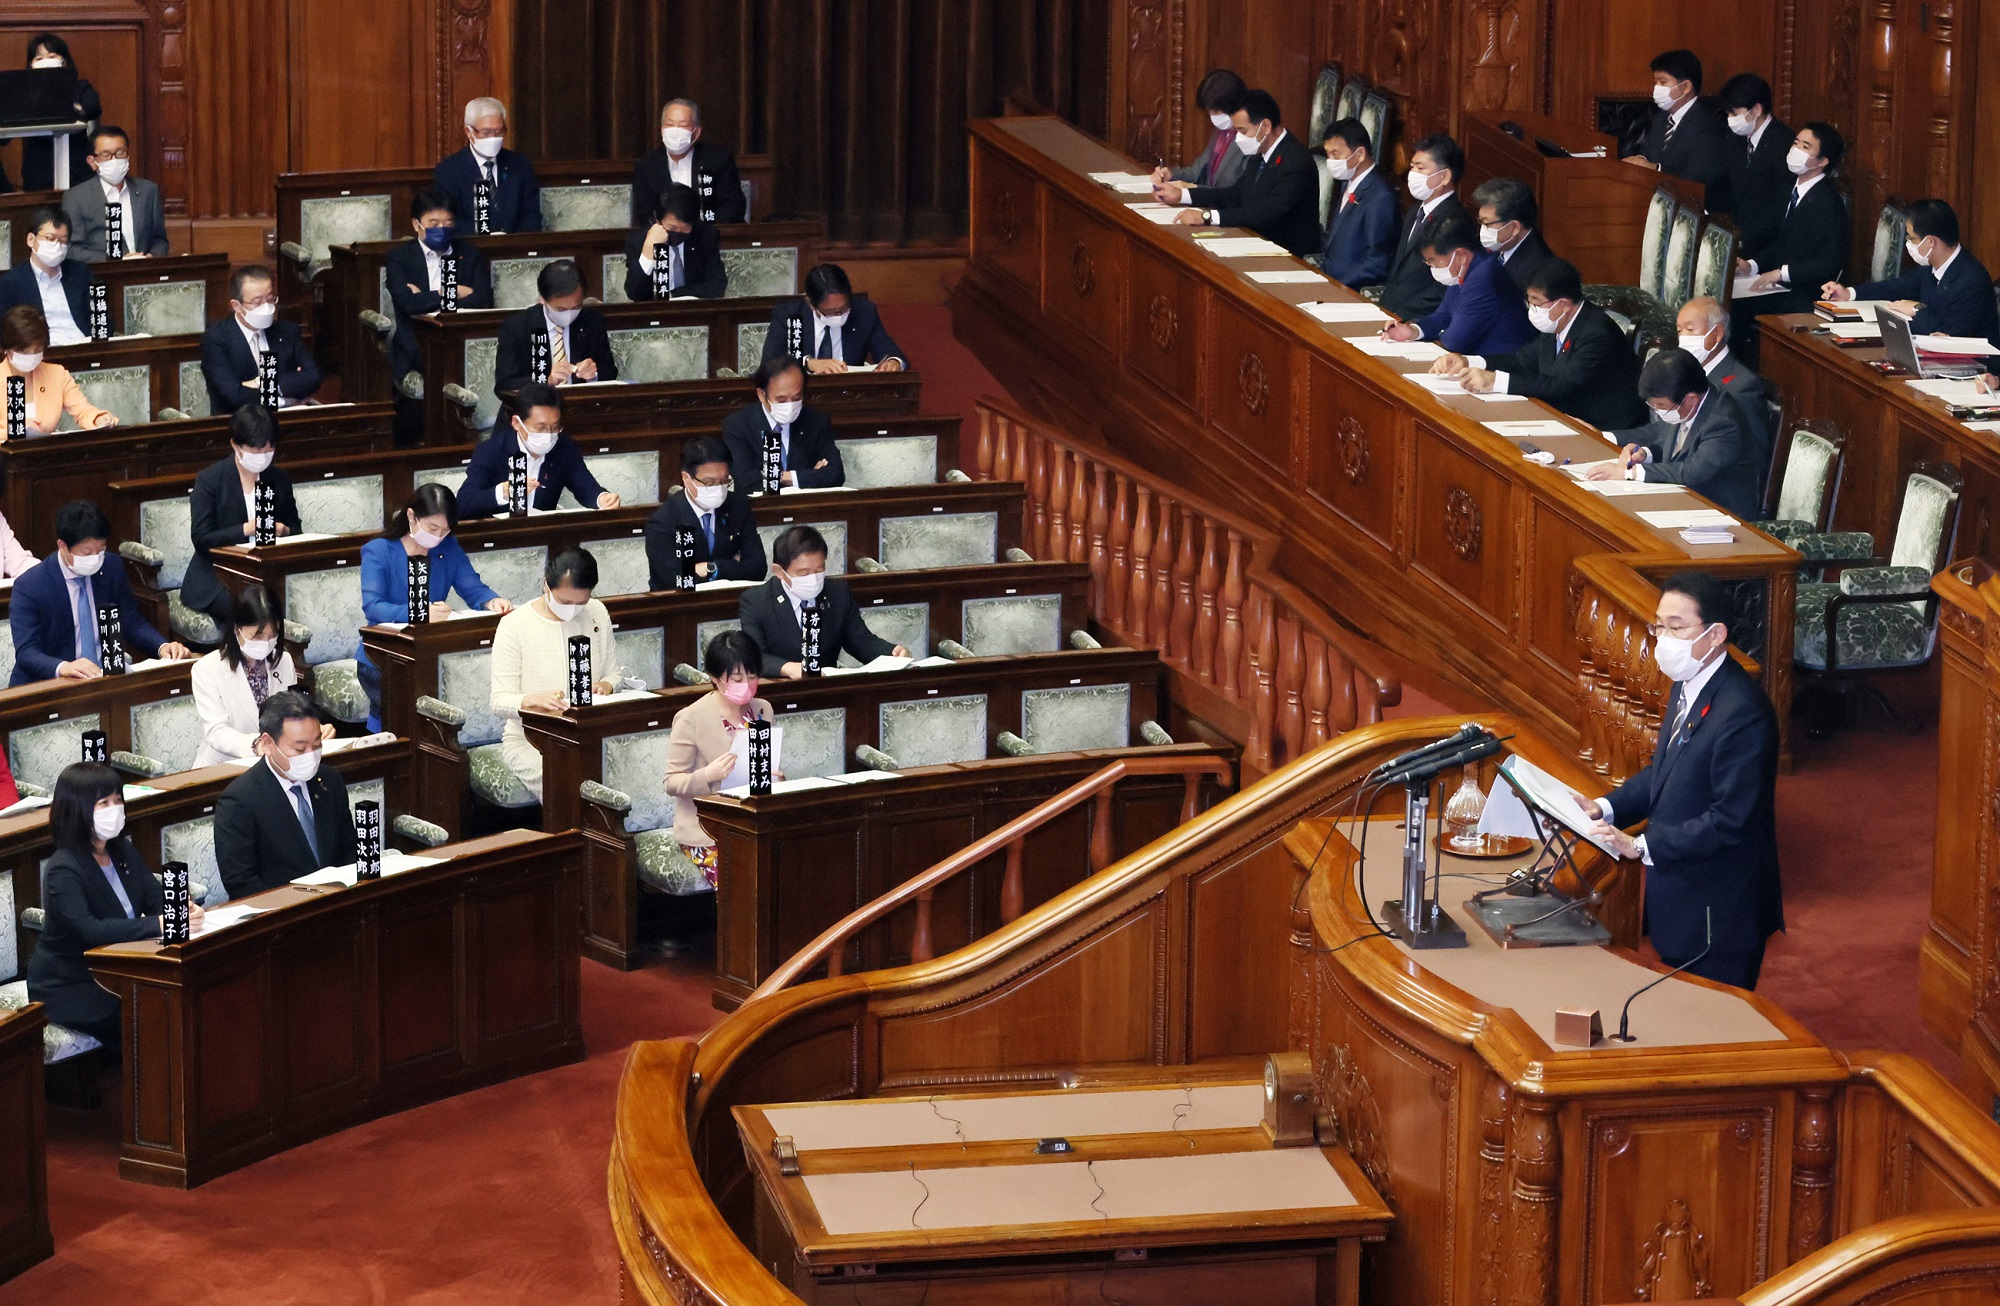 Photograph of the Prime Minister delivering a policy speech during a plenary session of the House of Representatives (11)